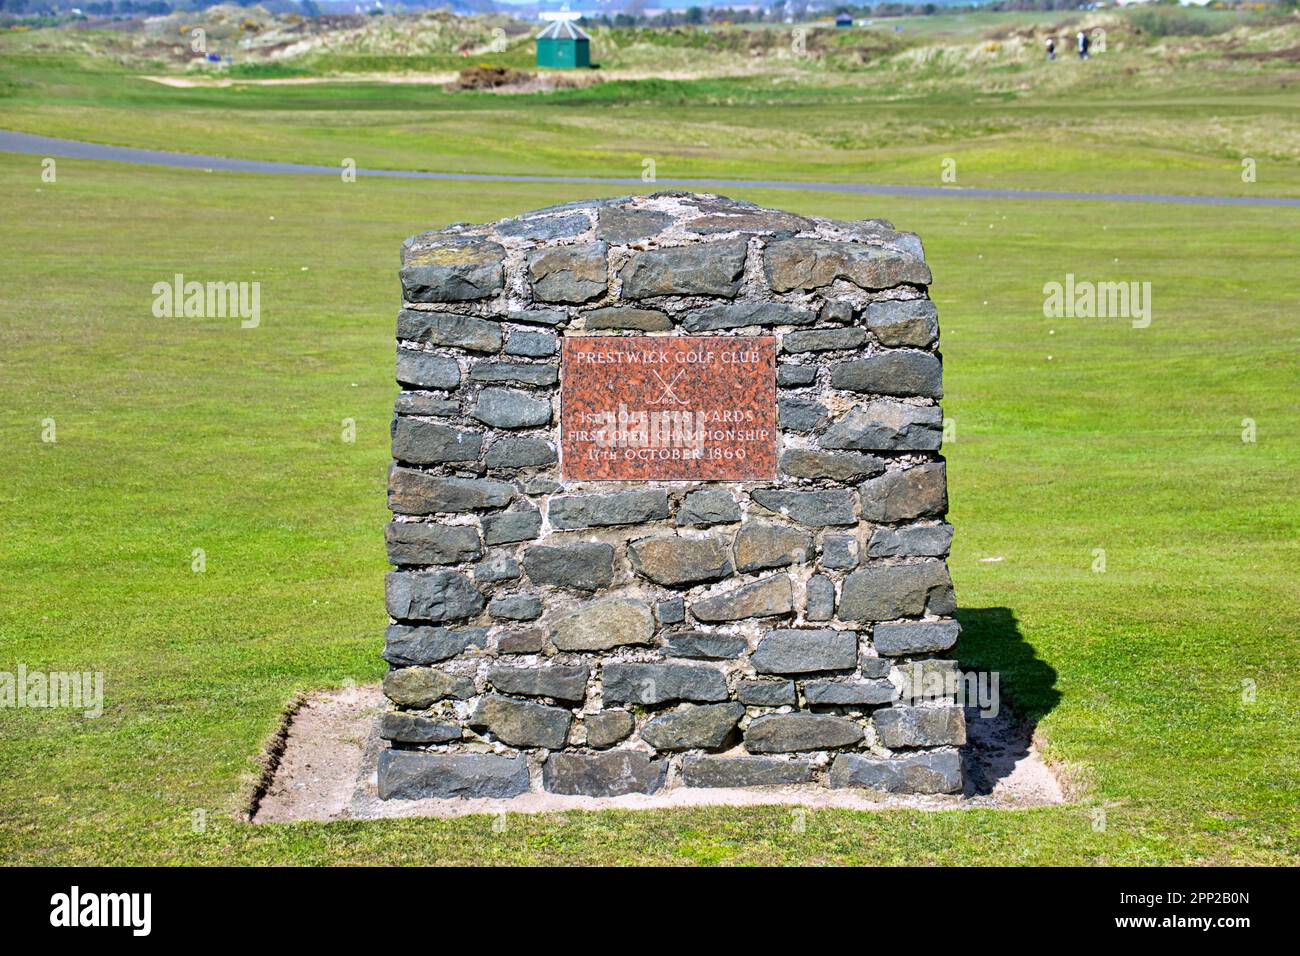 prestwick golf club cairn first hole plaque Stock Photo